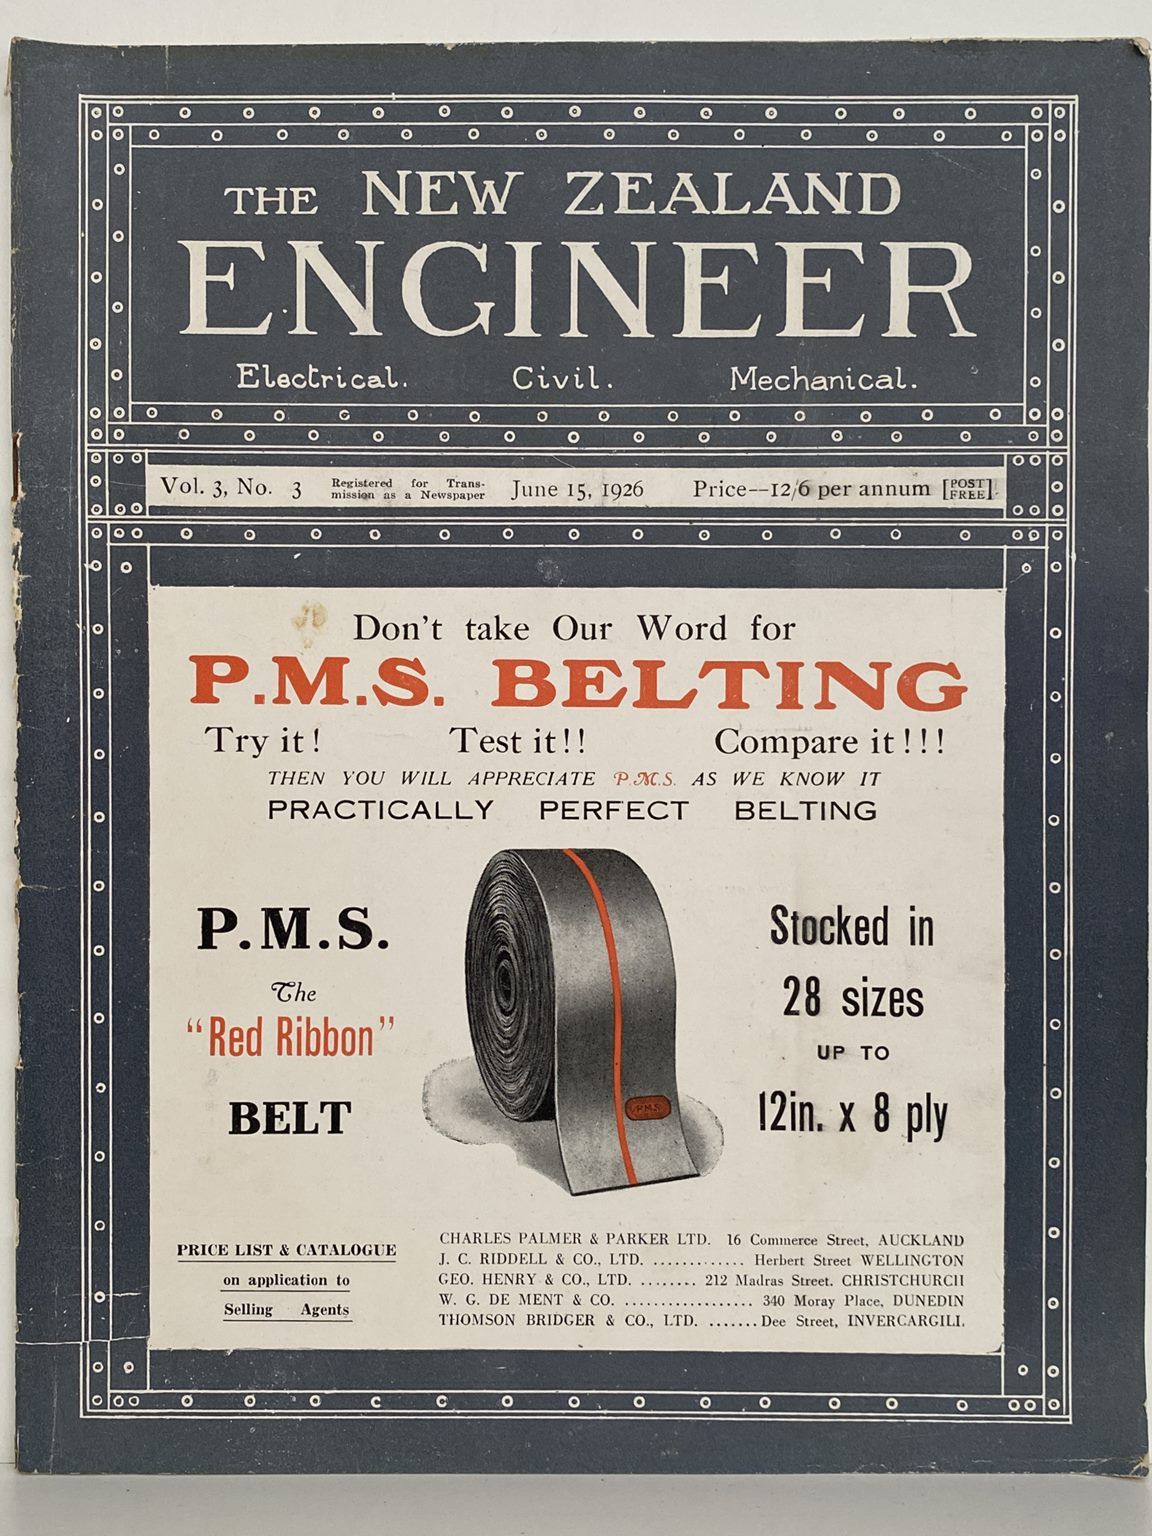 OLD MAGAZINE: The New Zealand Engineer Vol. 3, No. 3 - 15 June 1926